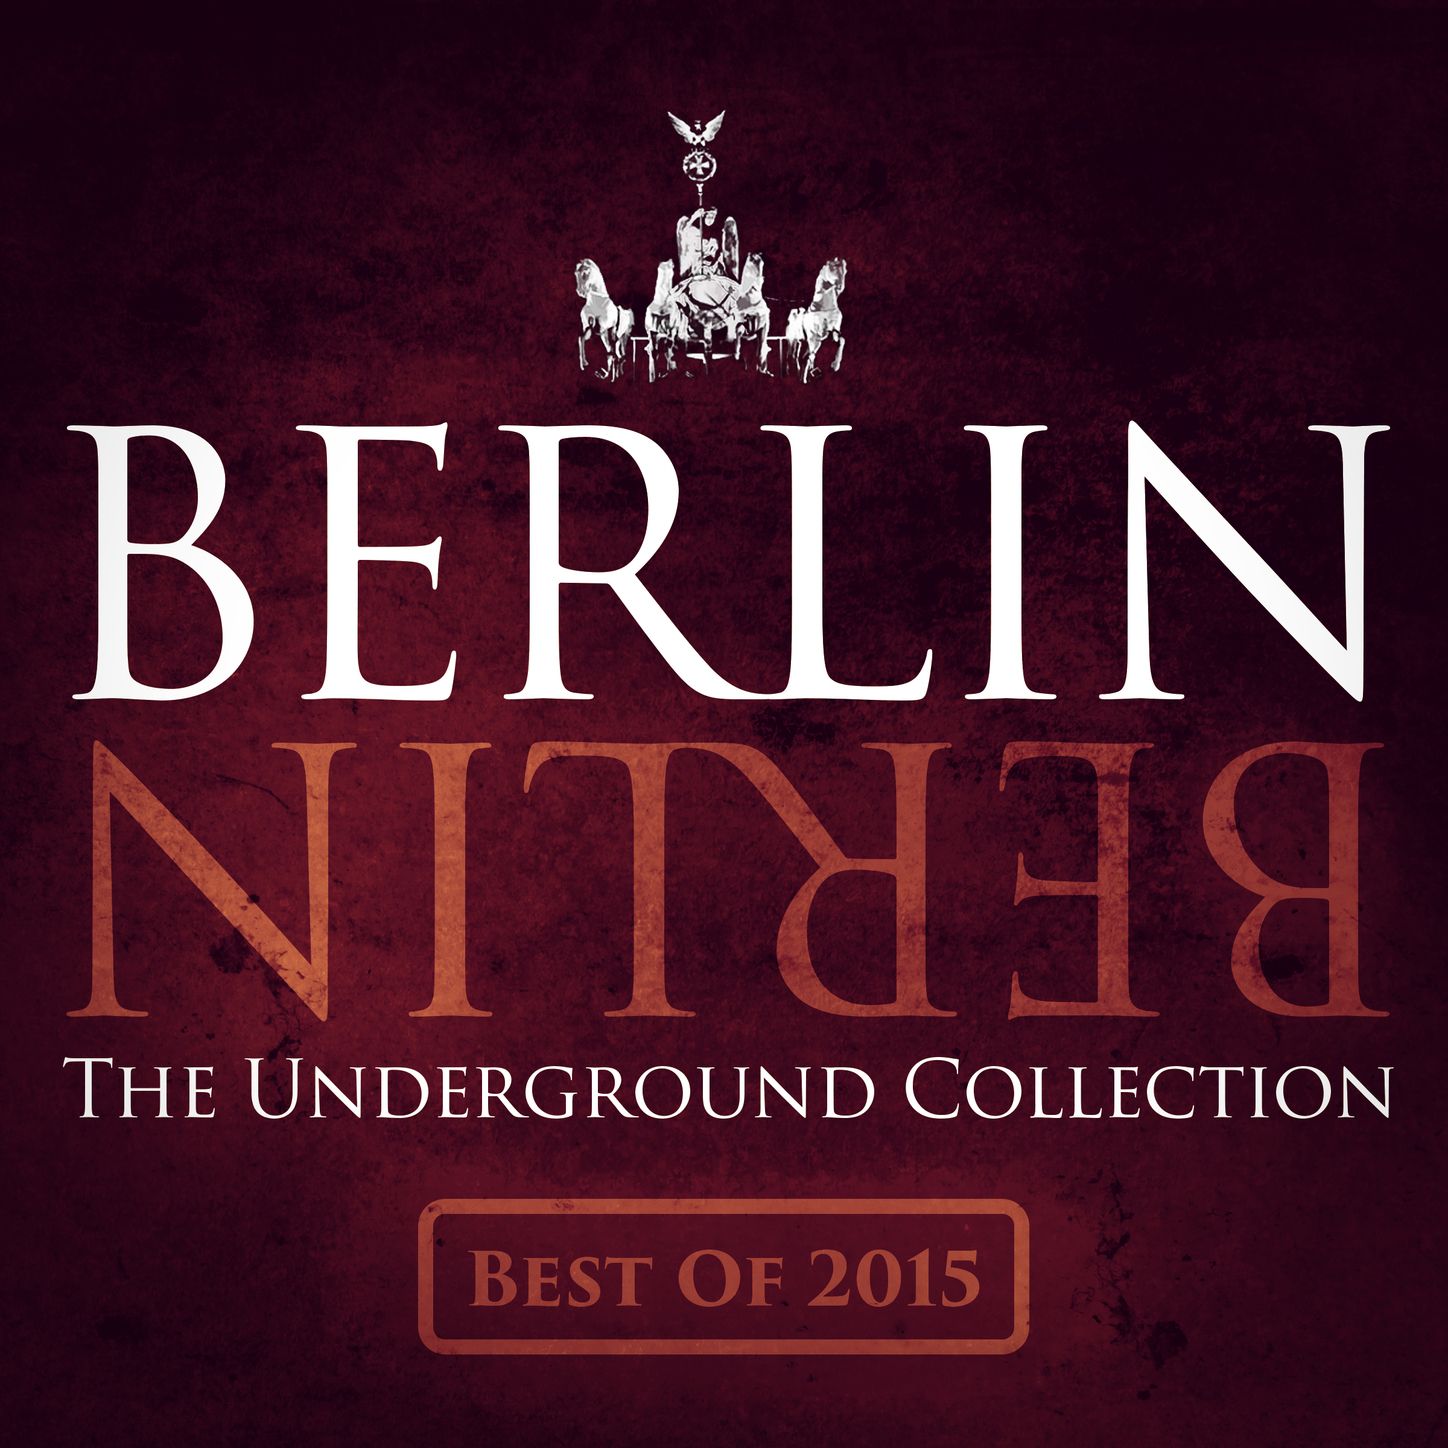 Berlin Berlin, Vol. 25 - The Underground Collection (The Best of 2015)